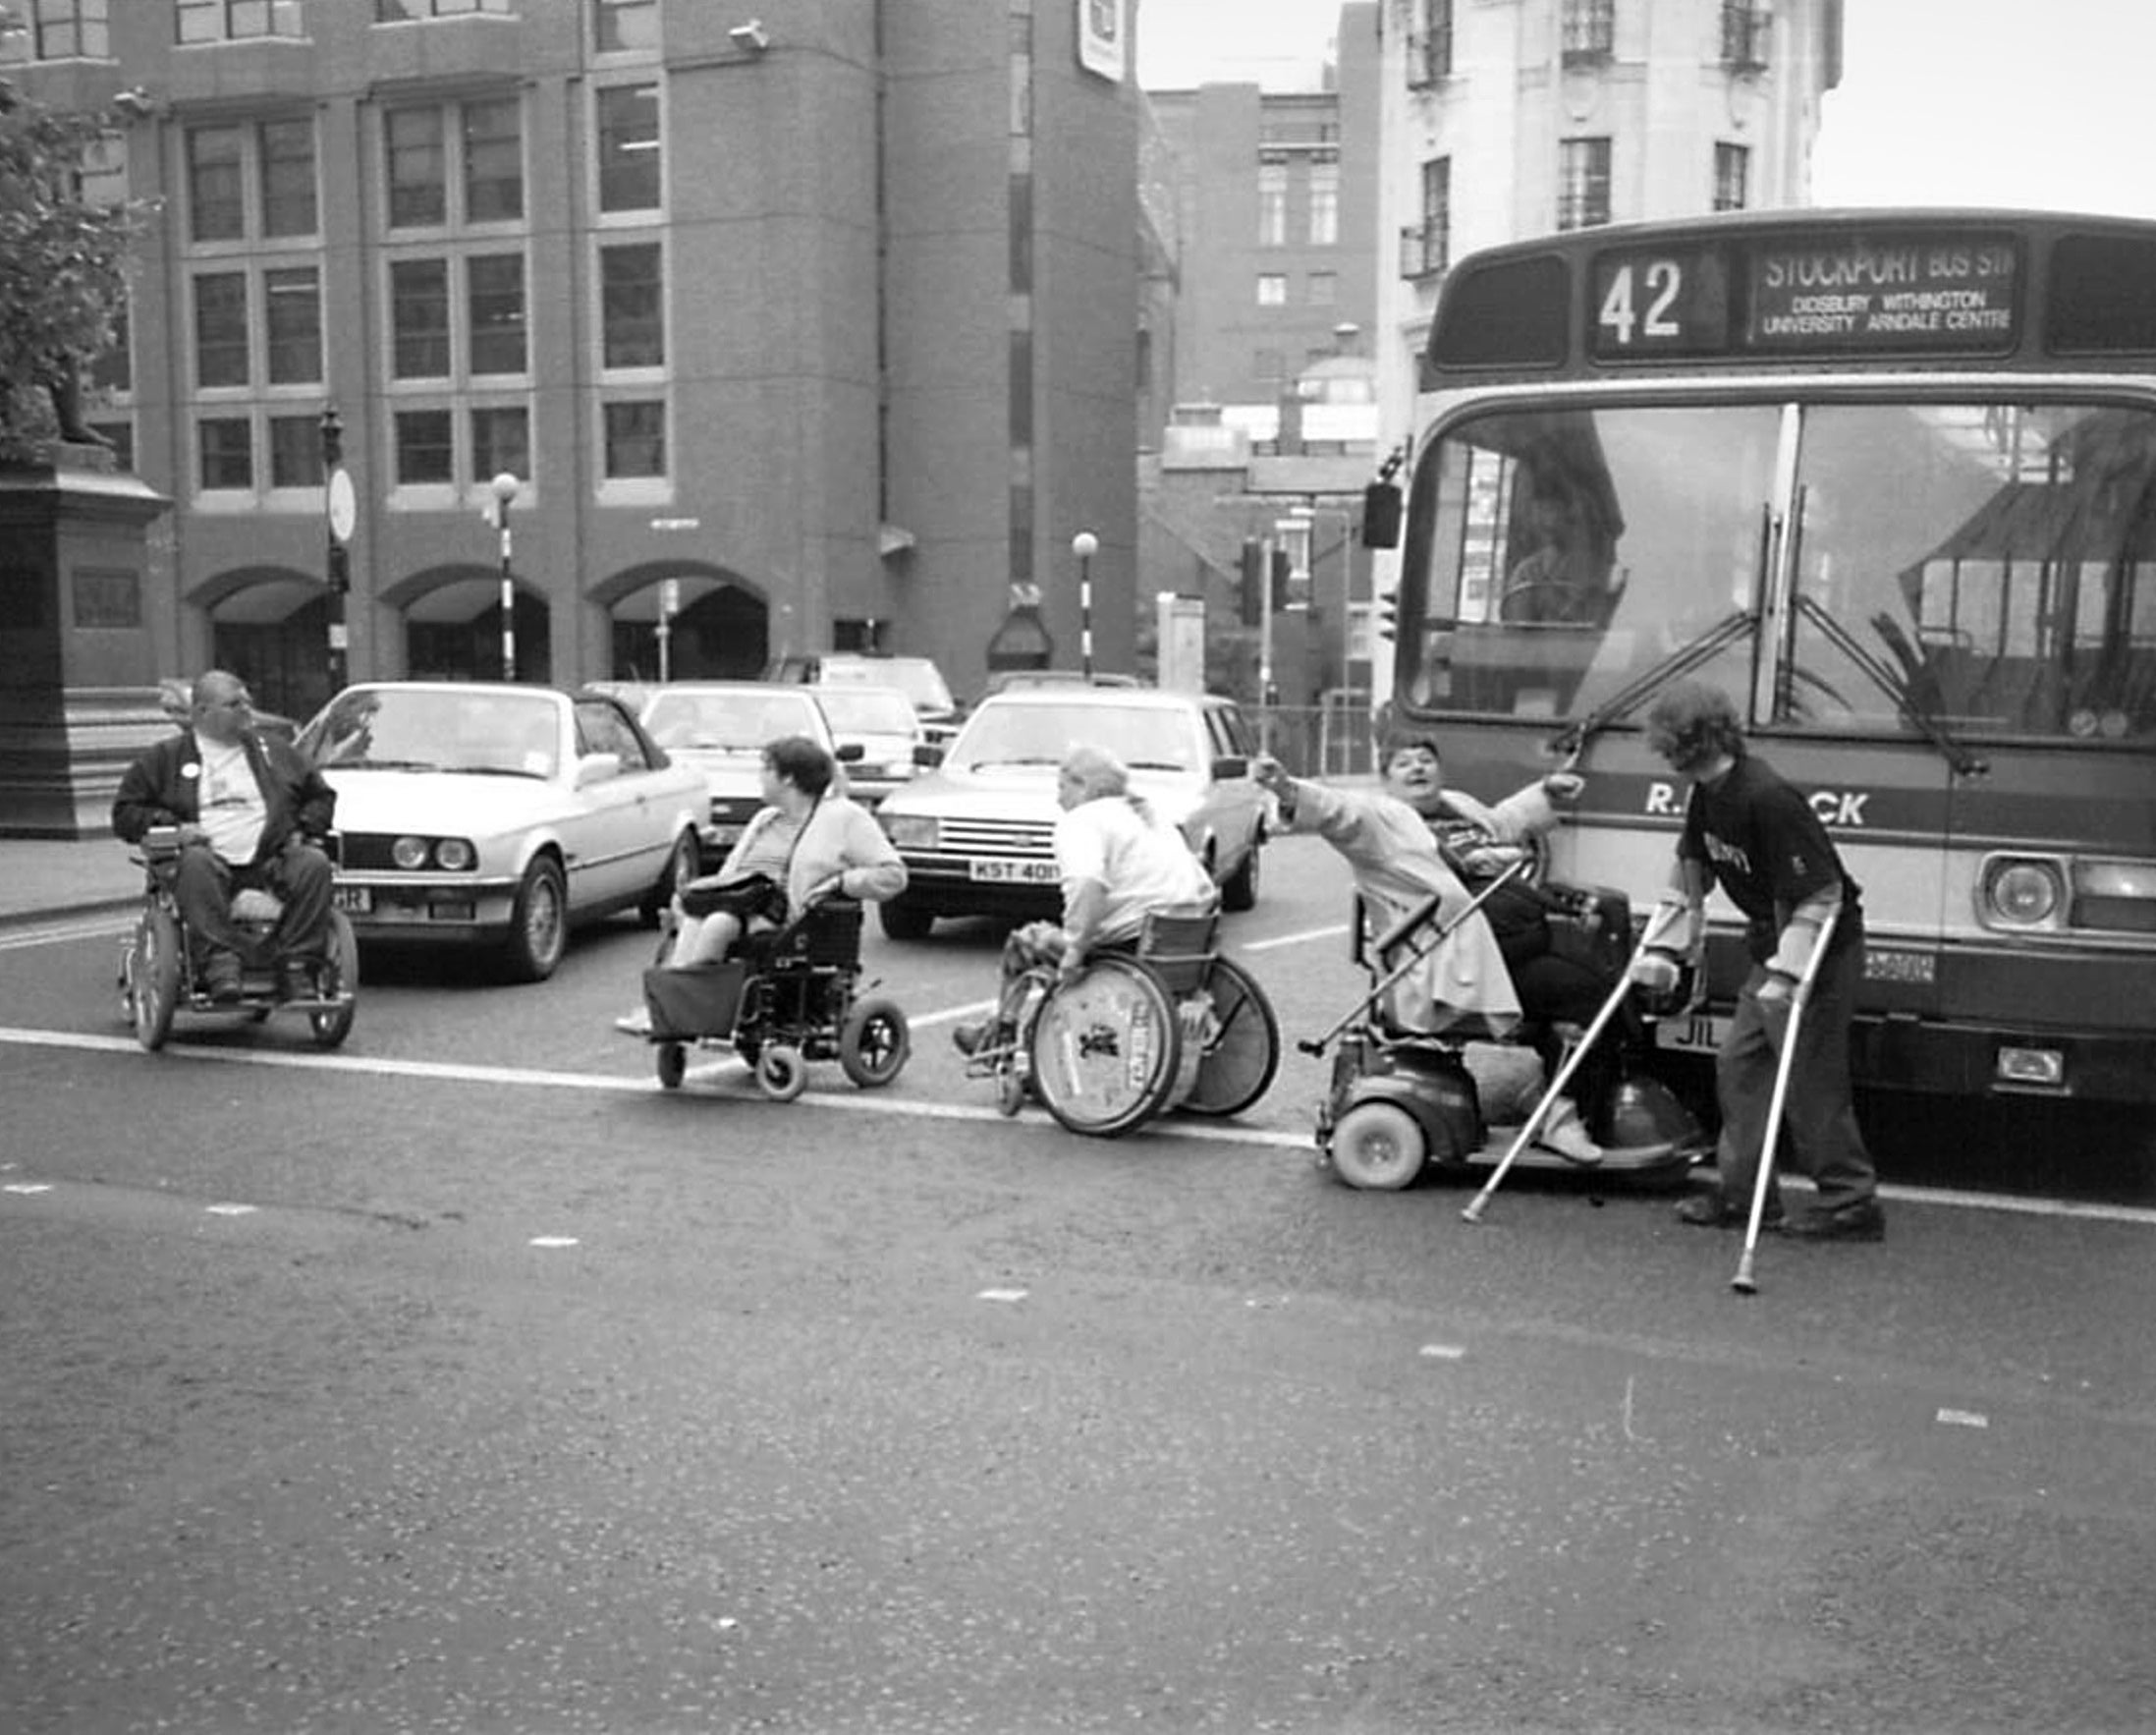 Disabled people taking part in a direct action protest against discrimination in the early 1990s